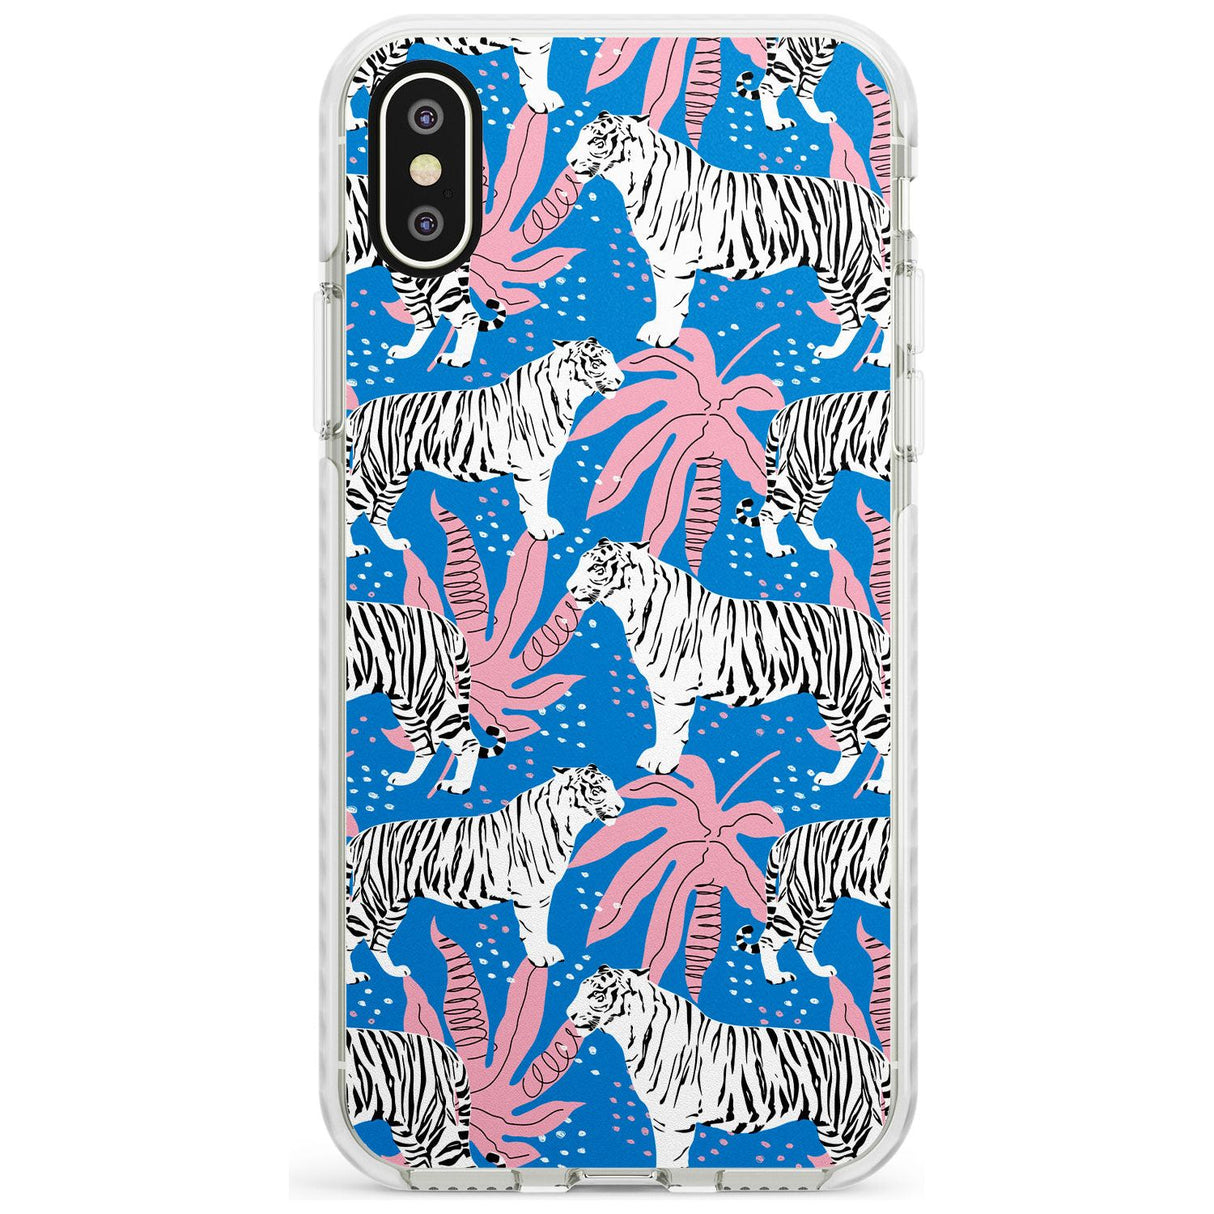 Bengal Blues Impact Phone Case for iPhone X XS Max XR